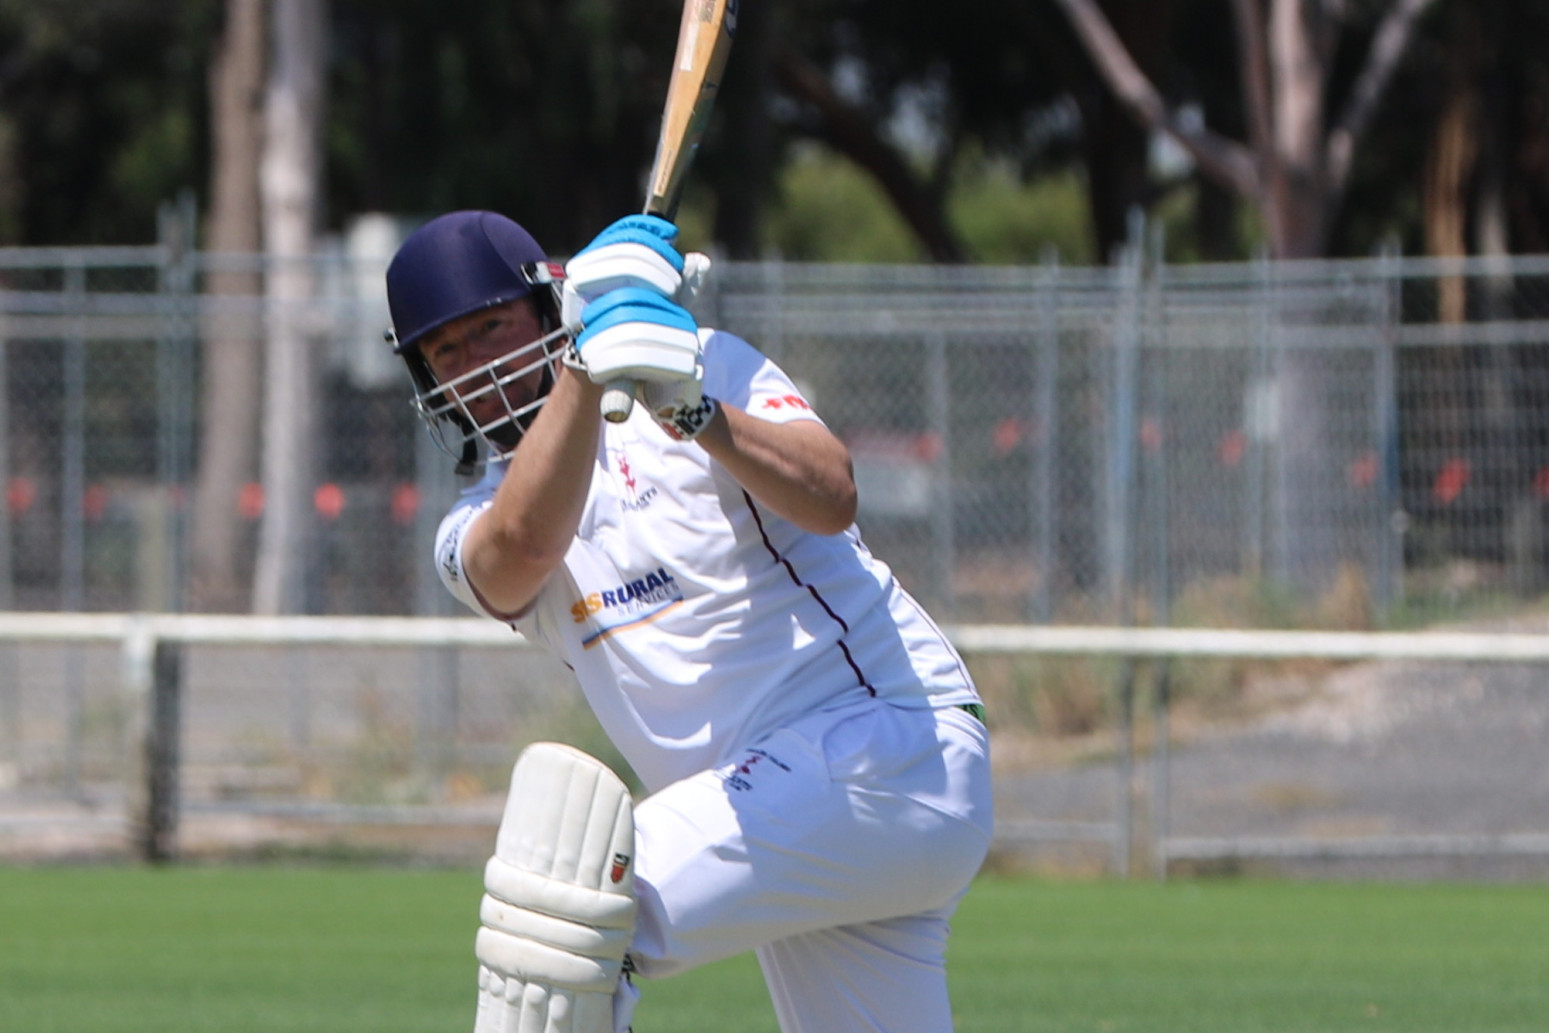 Shane Oakley came back into the squad and scored an important 38 (84).